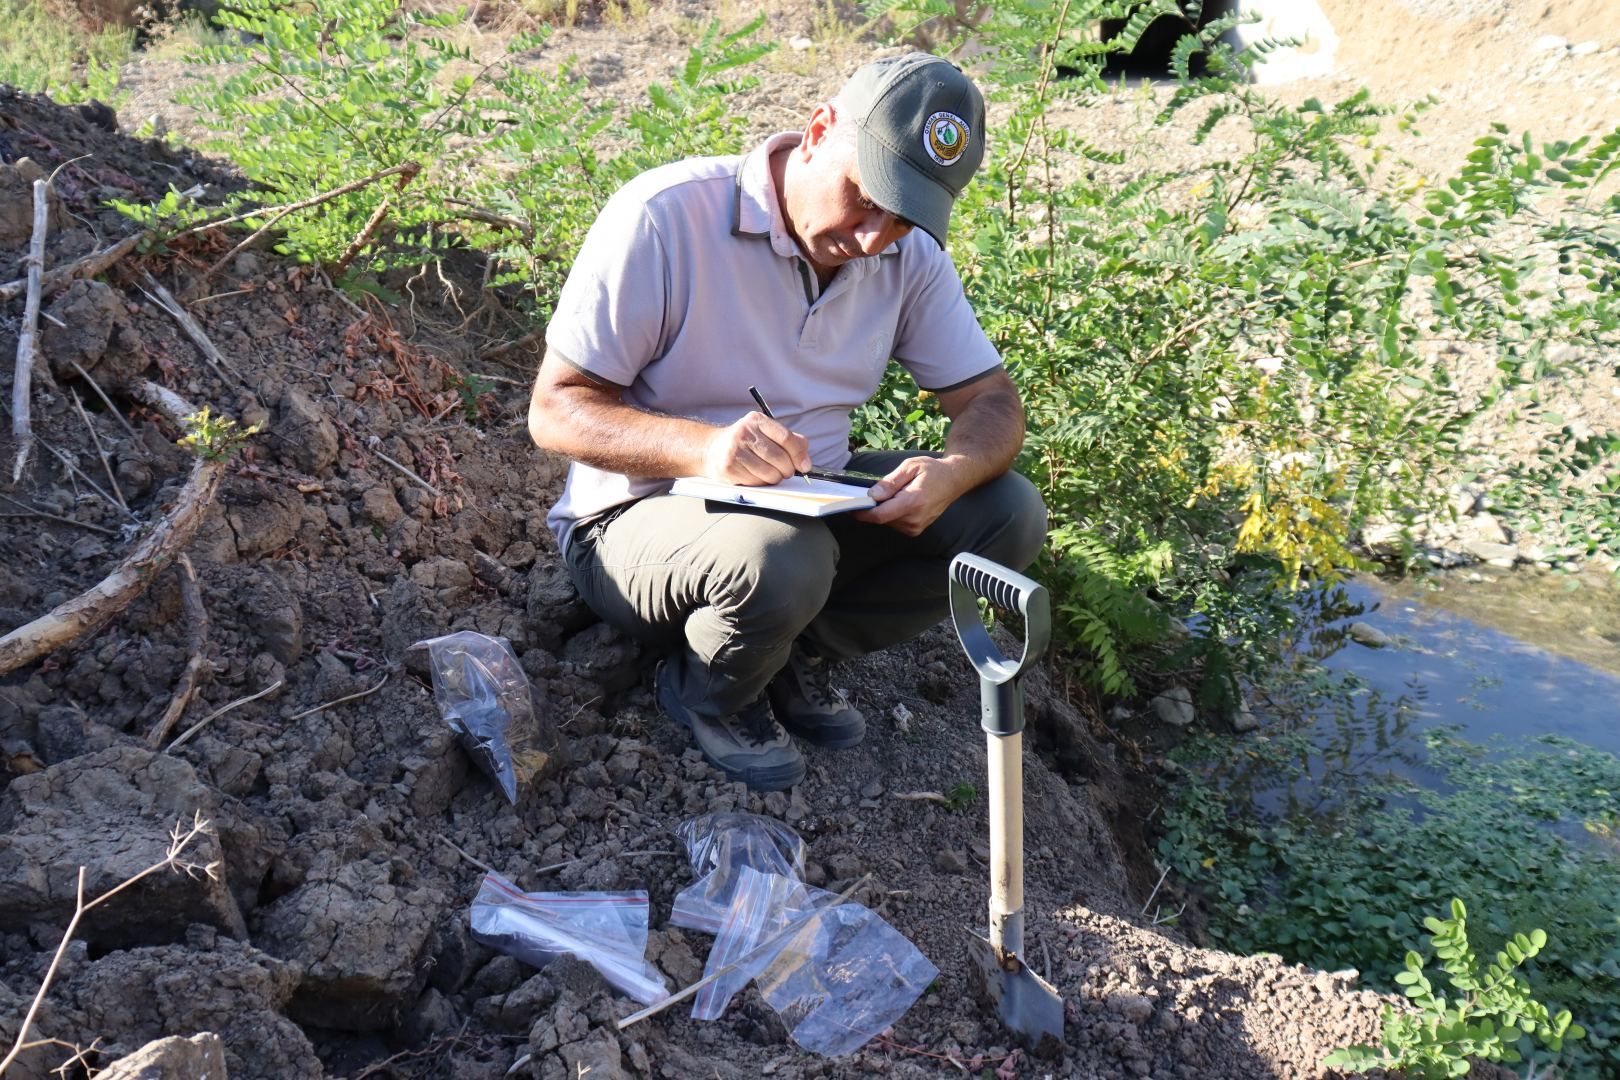 Turkish experts to research soil samples for future park complex in Azerbaijan's Fuzuli [PHOTO]